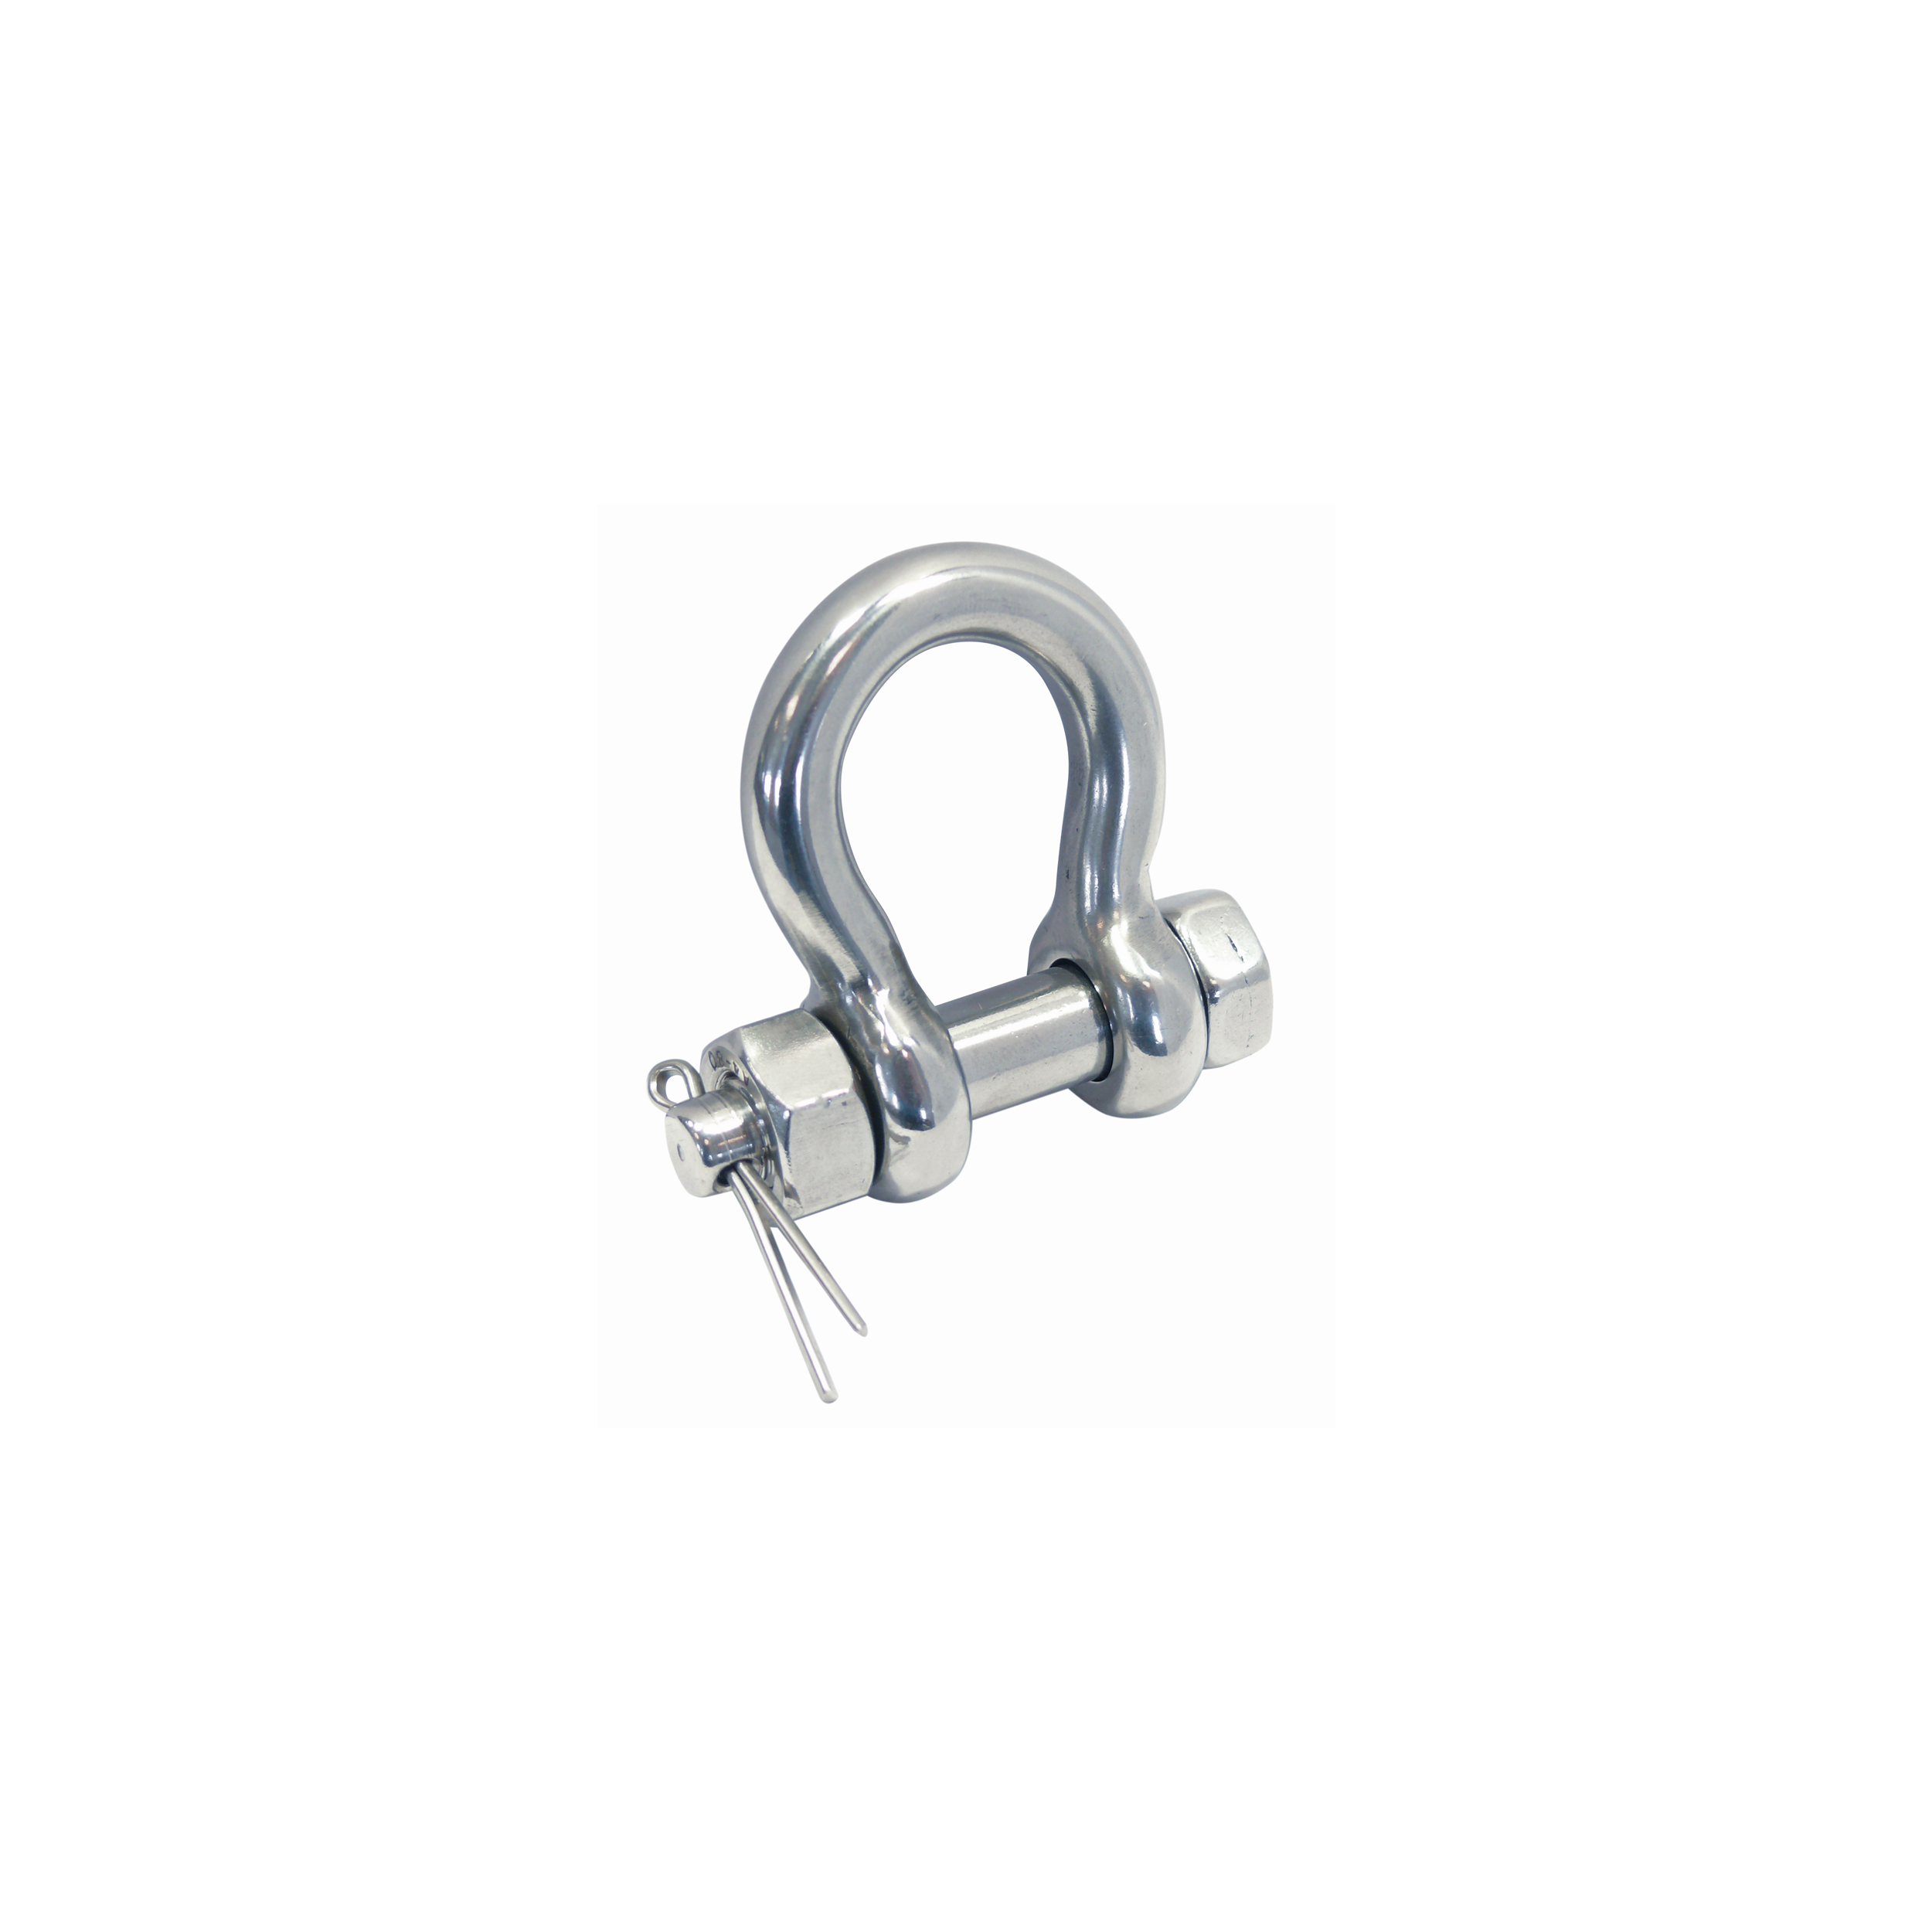 Bow shackle with secure bolt A4  bolt 11mm, bow 10mm